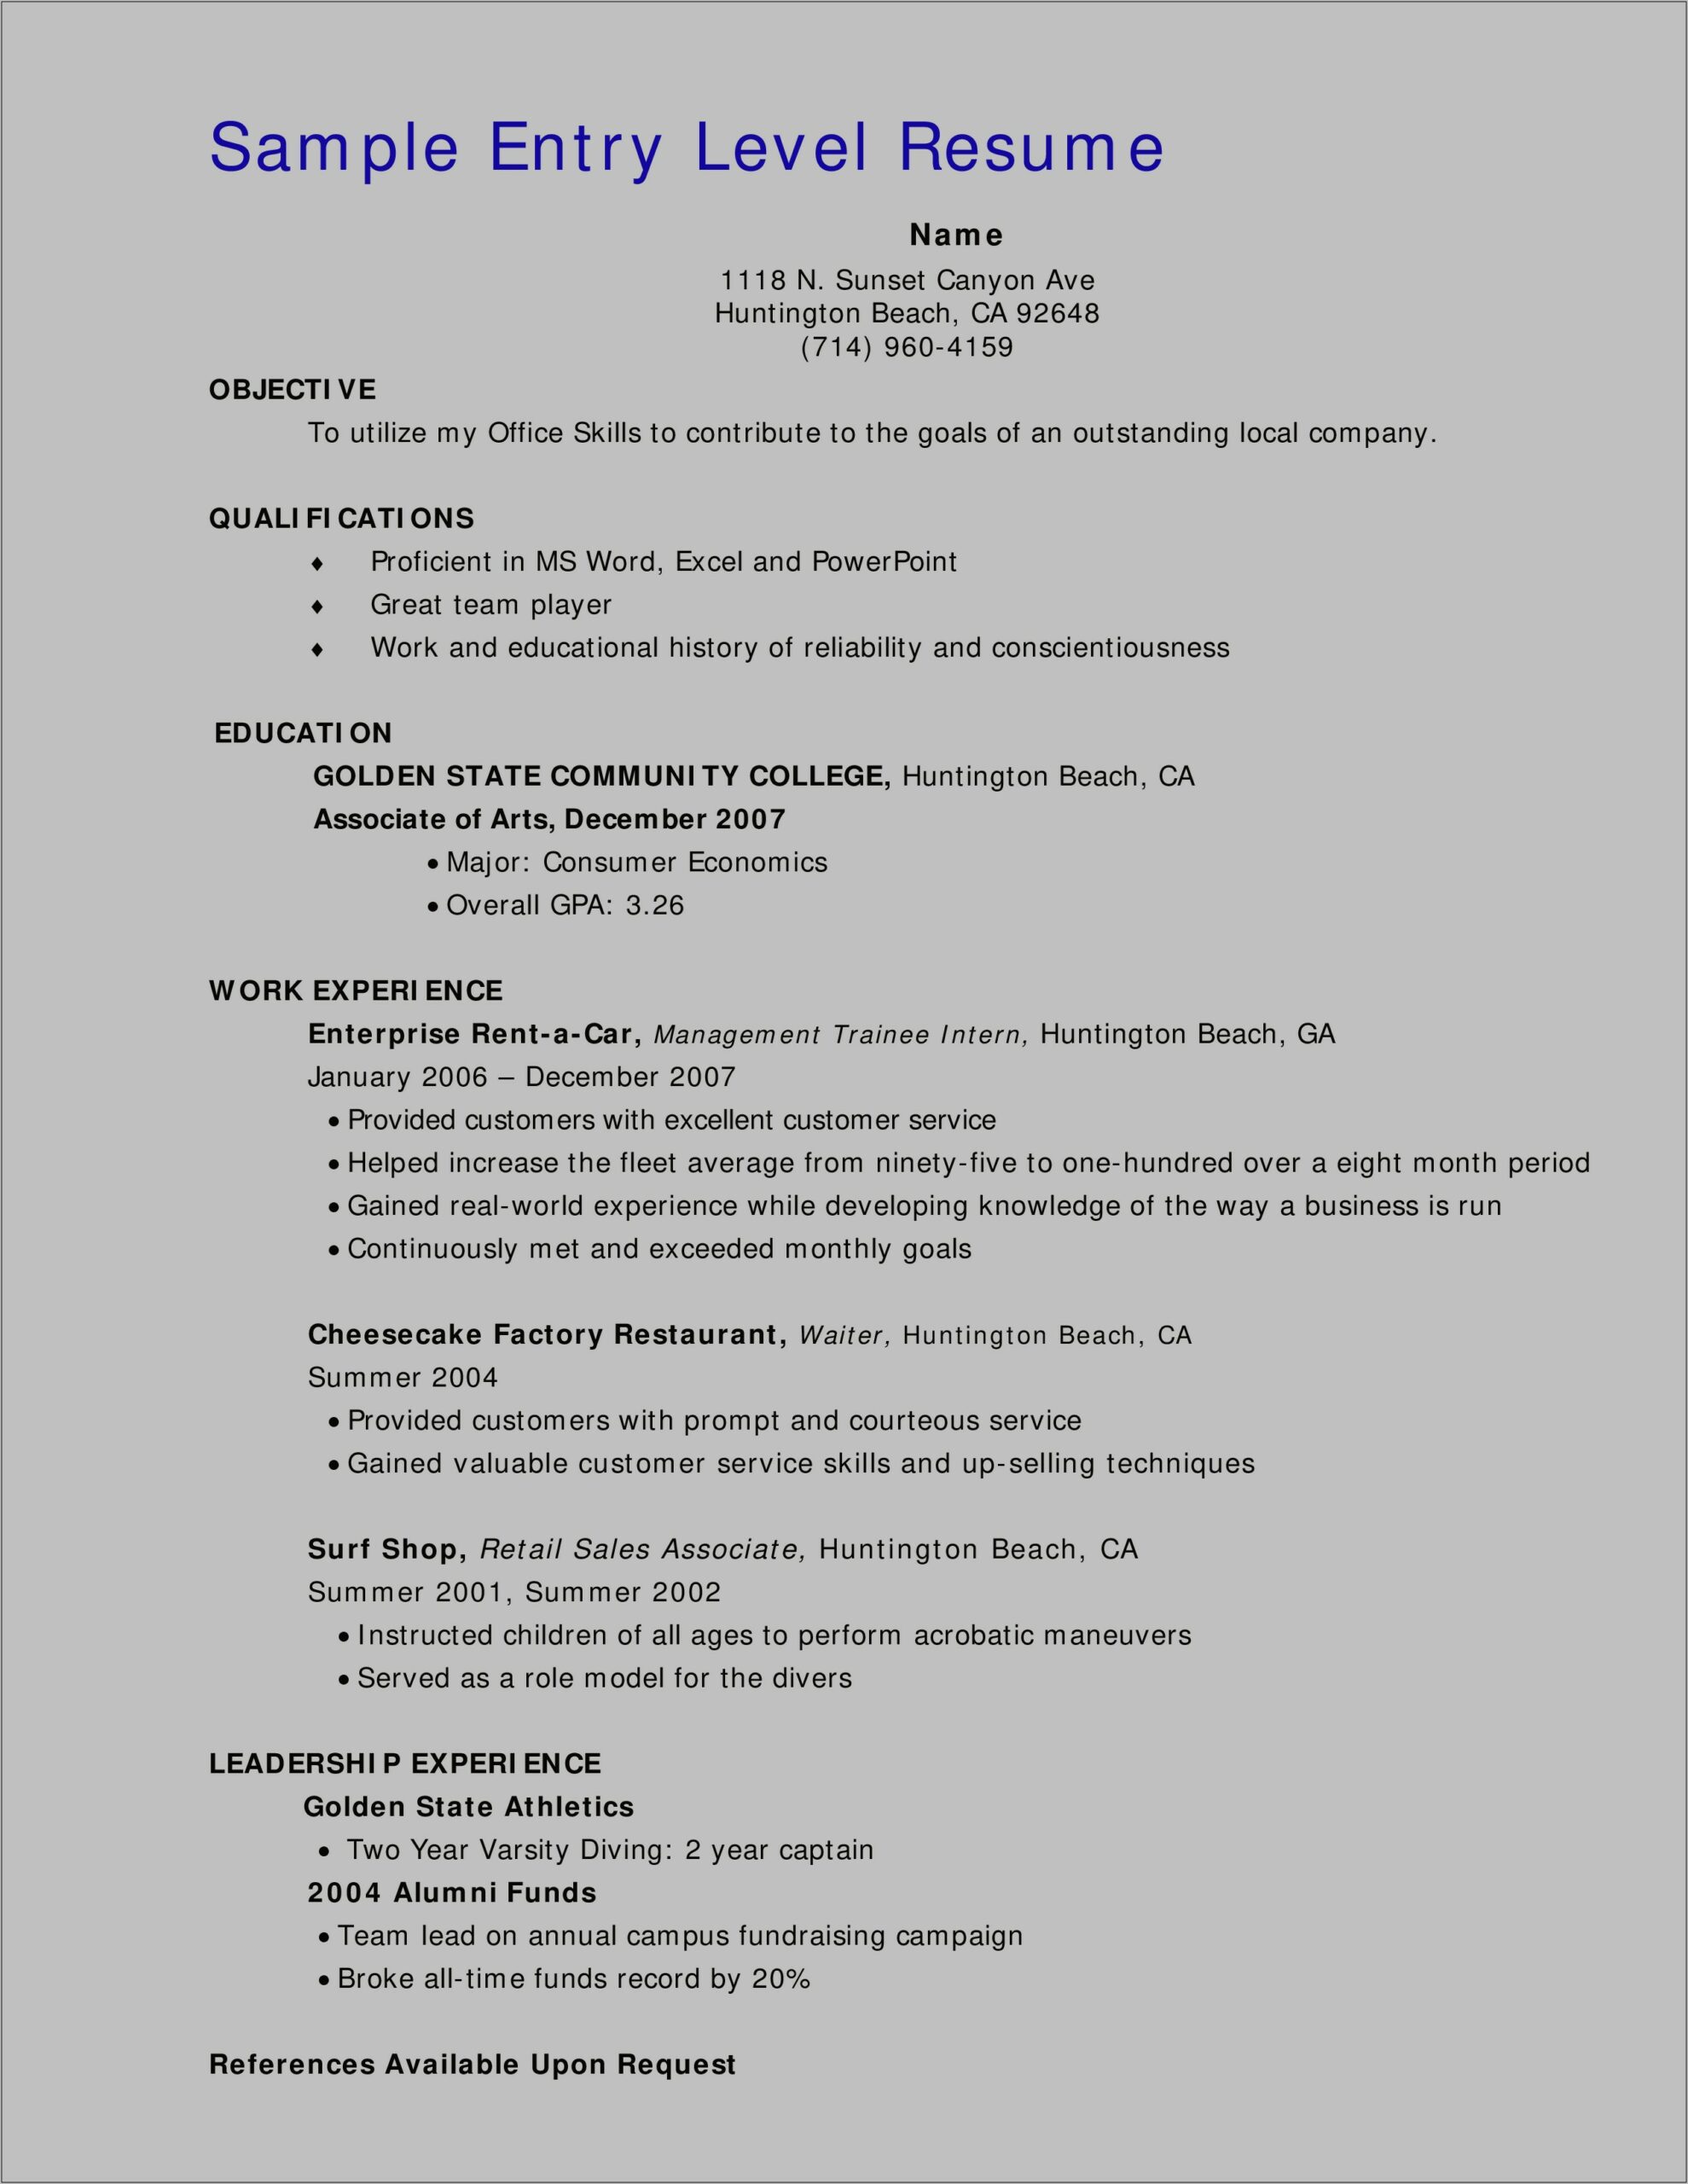 Skills For An Entry Level Resume